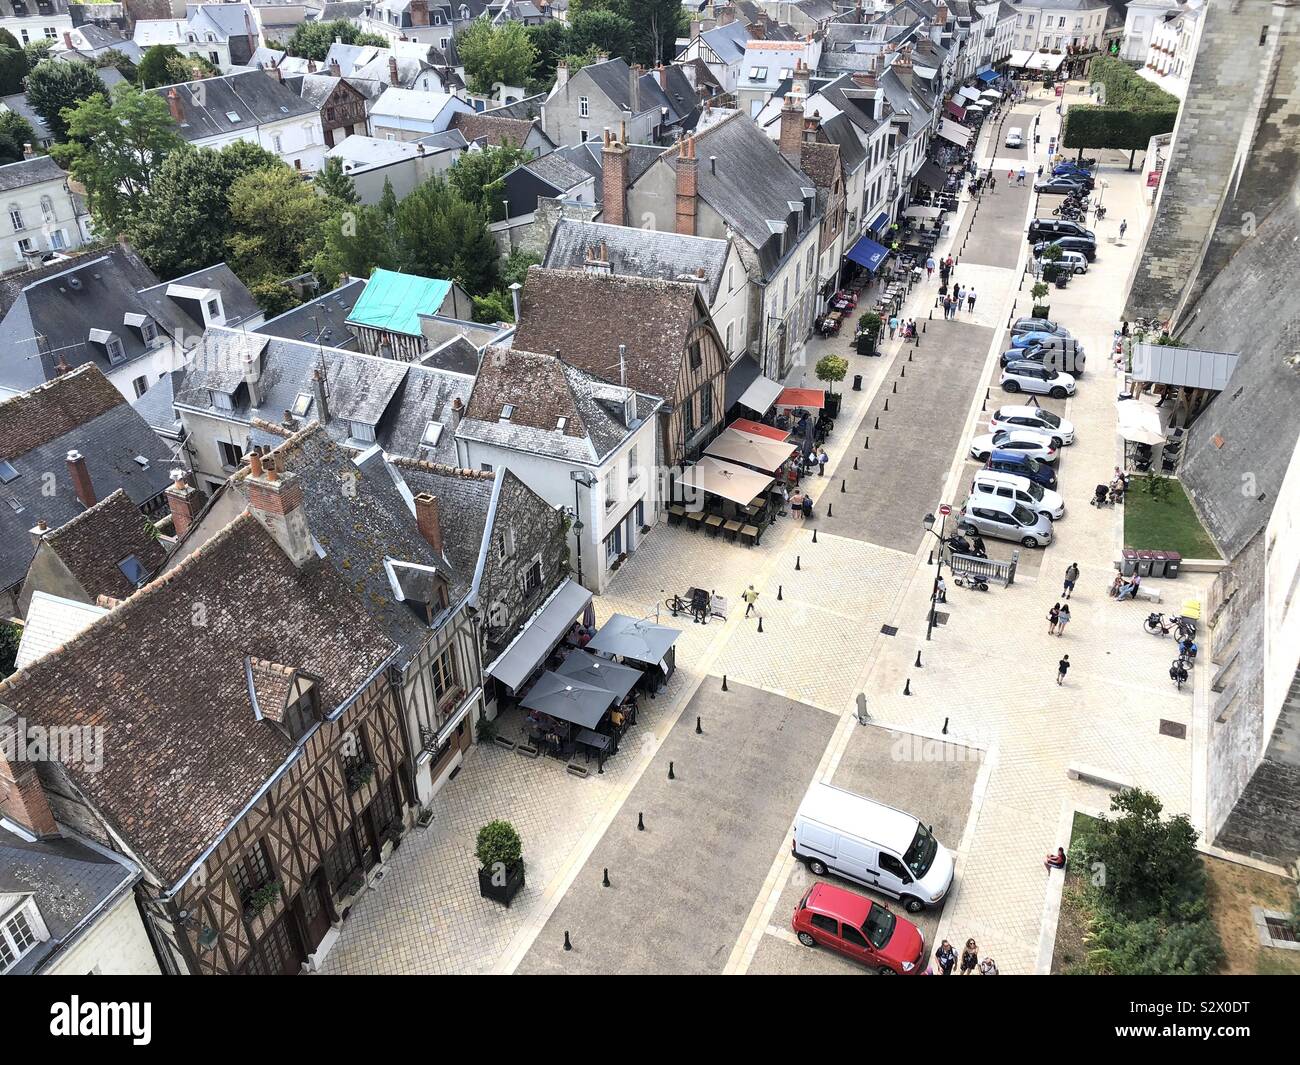 Looking down on a street in Amboise in France Stock Photo